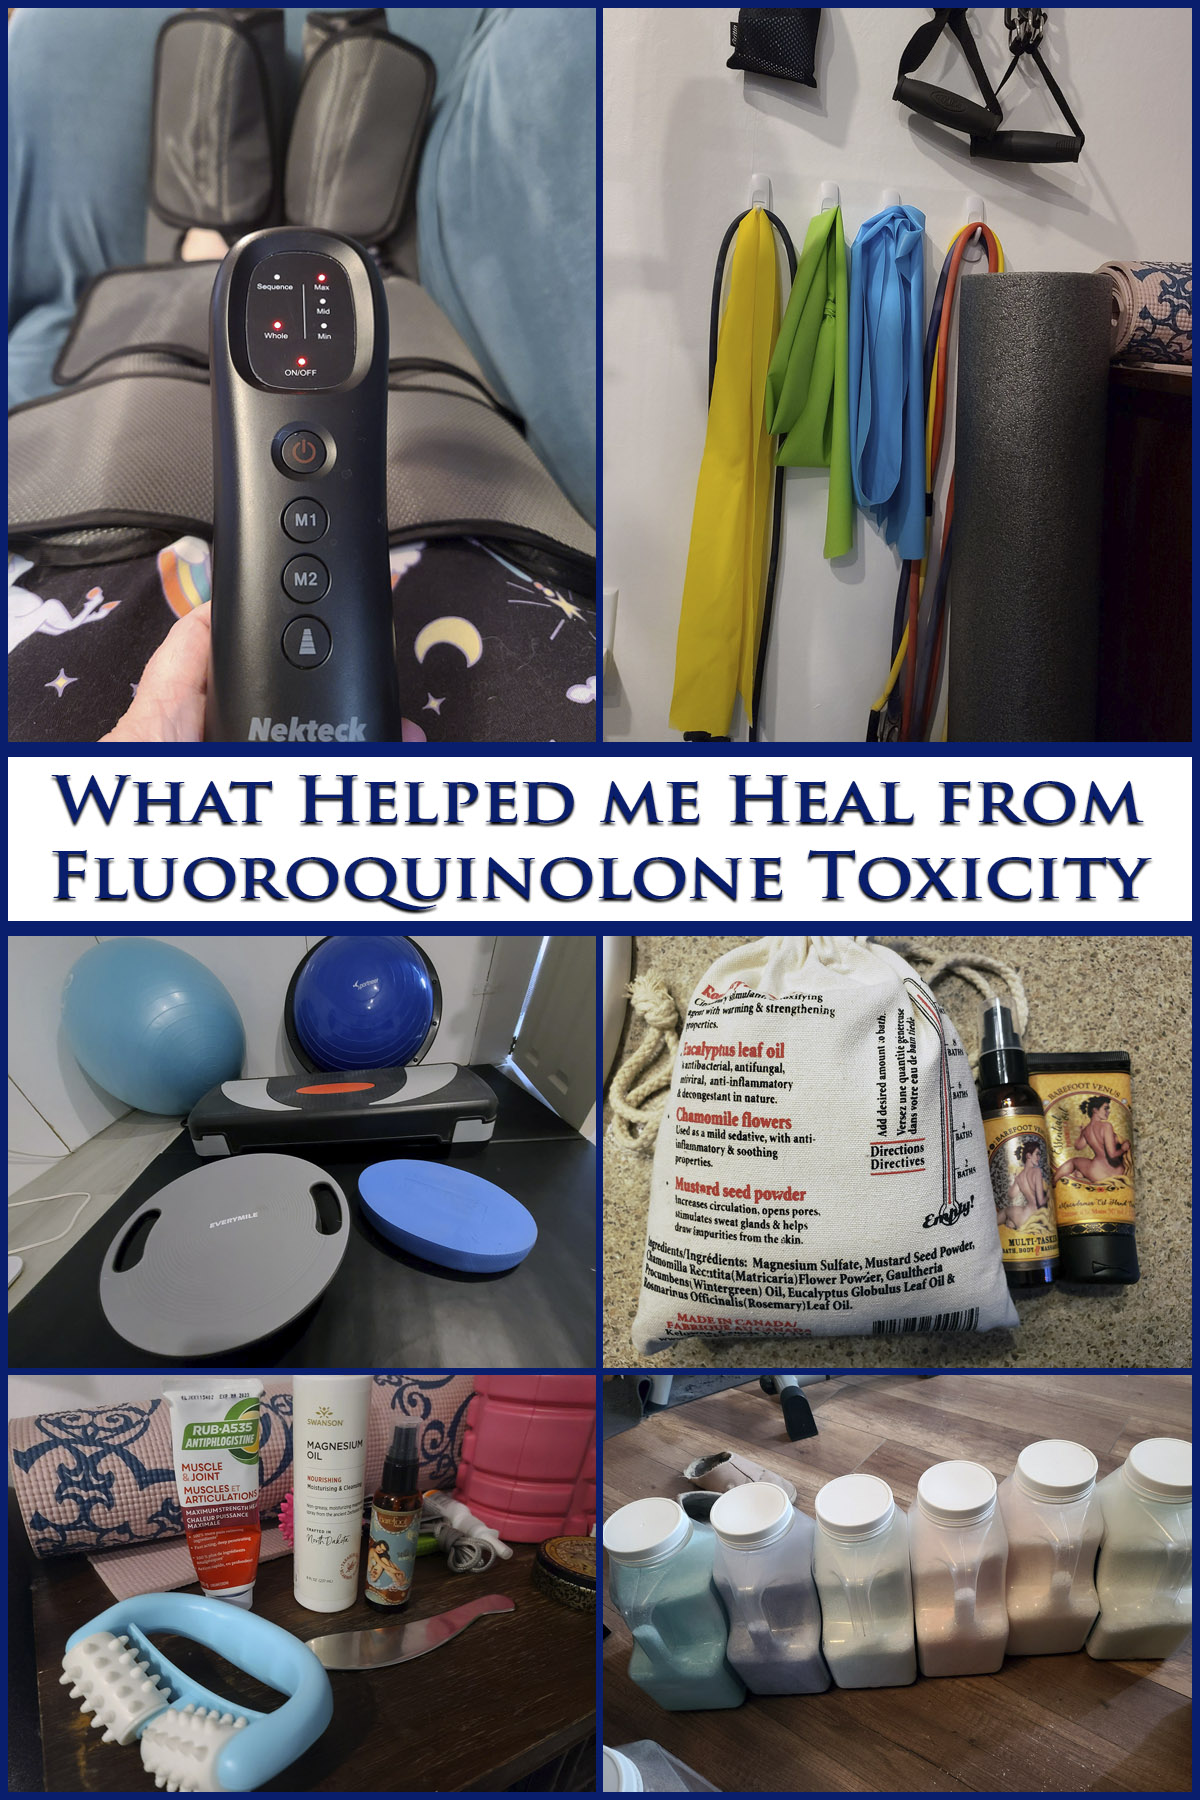 A compilation of images from this post, with text that says what helped me heal from fluoroquinolone toxicity.